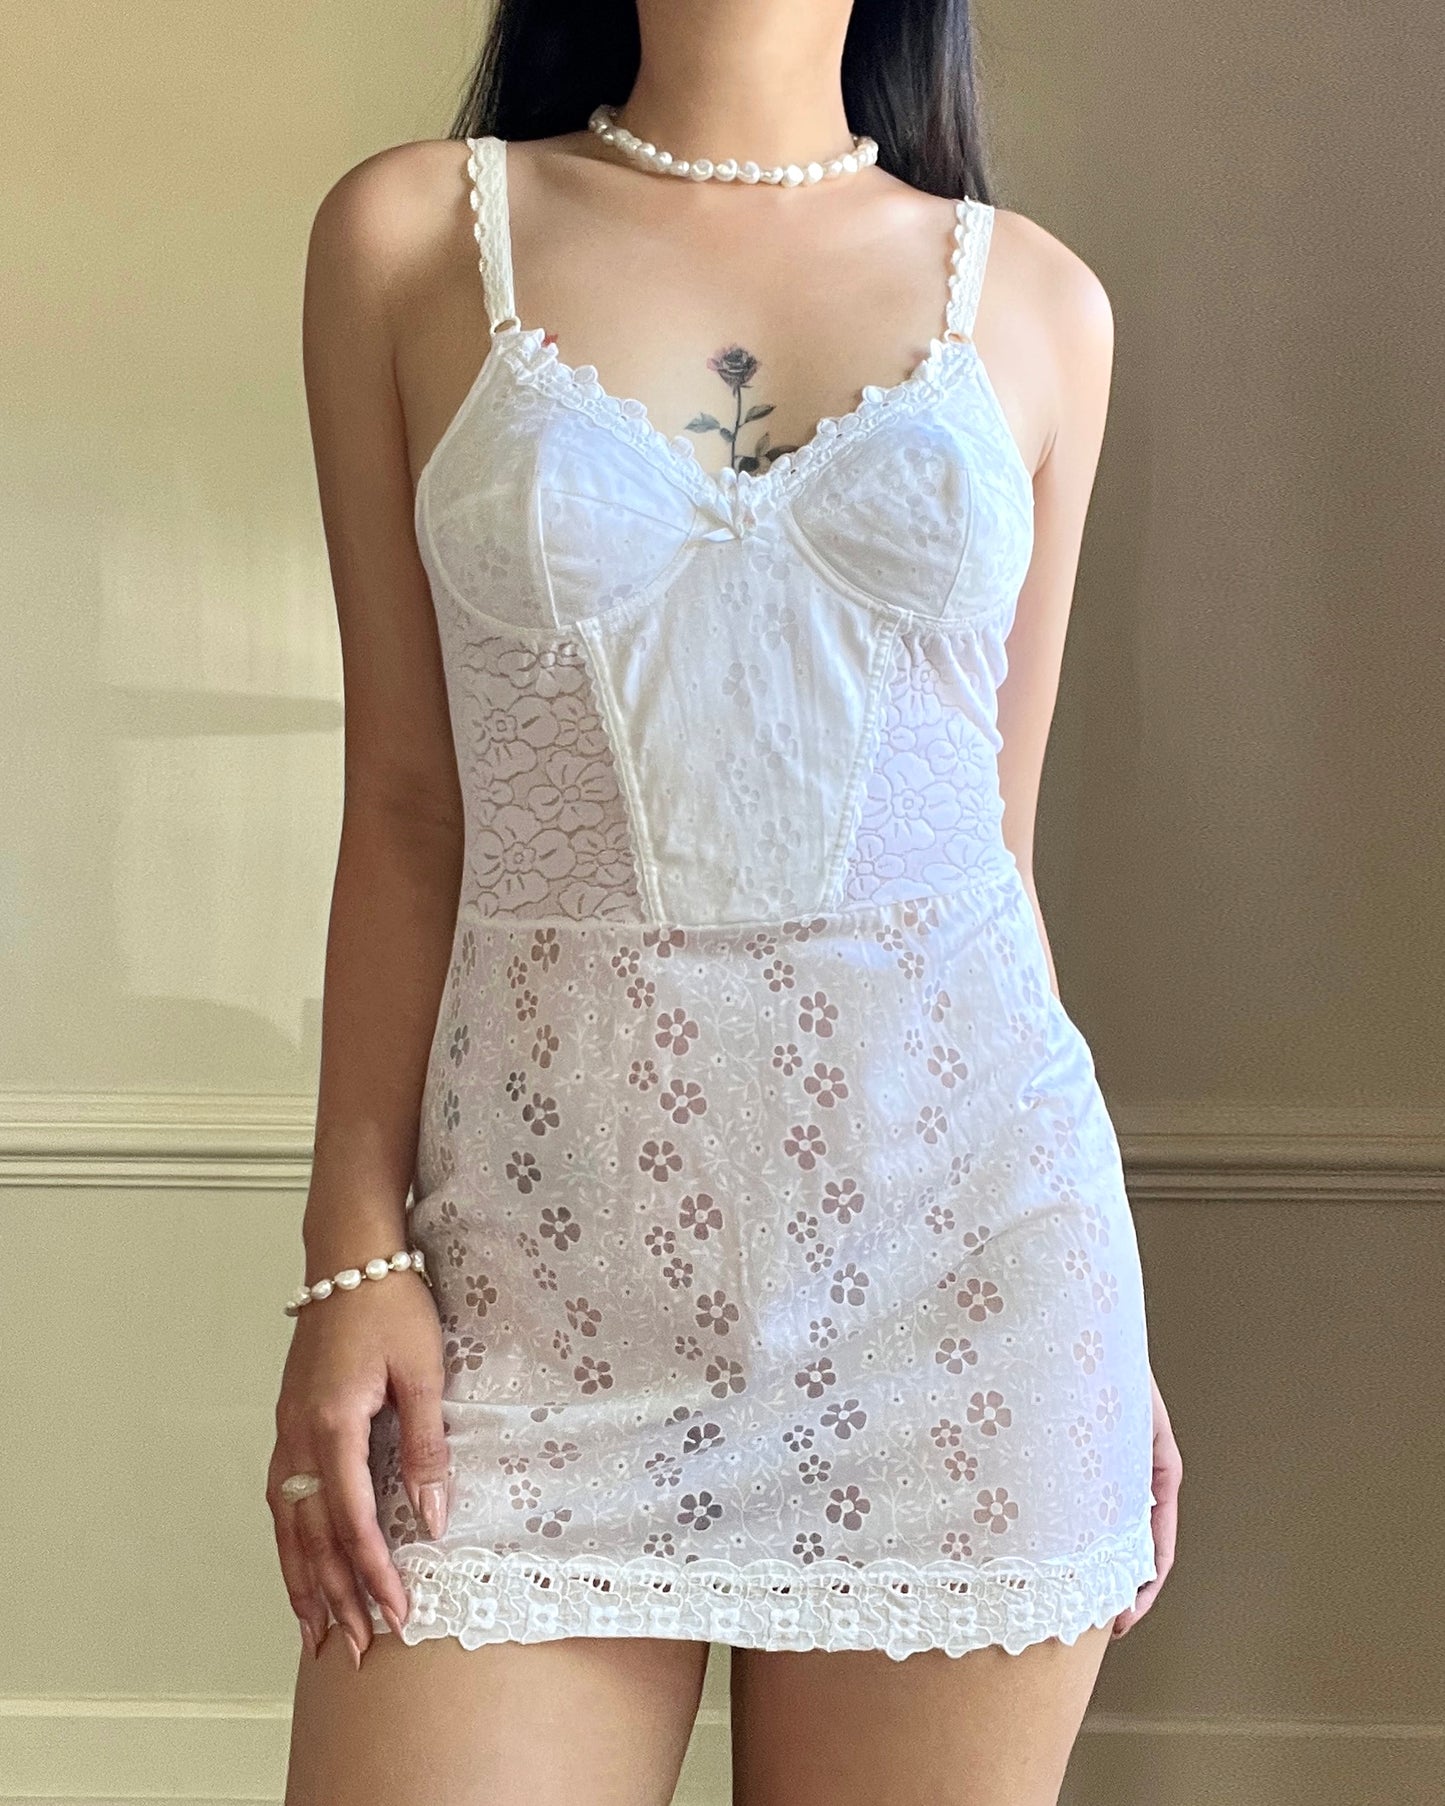 Adorable Princess Cotton Slip Dress featuring Sheer Daisy Embroidery